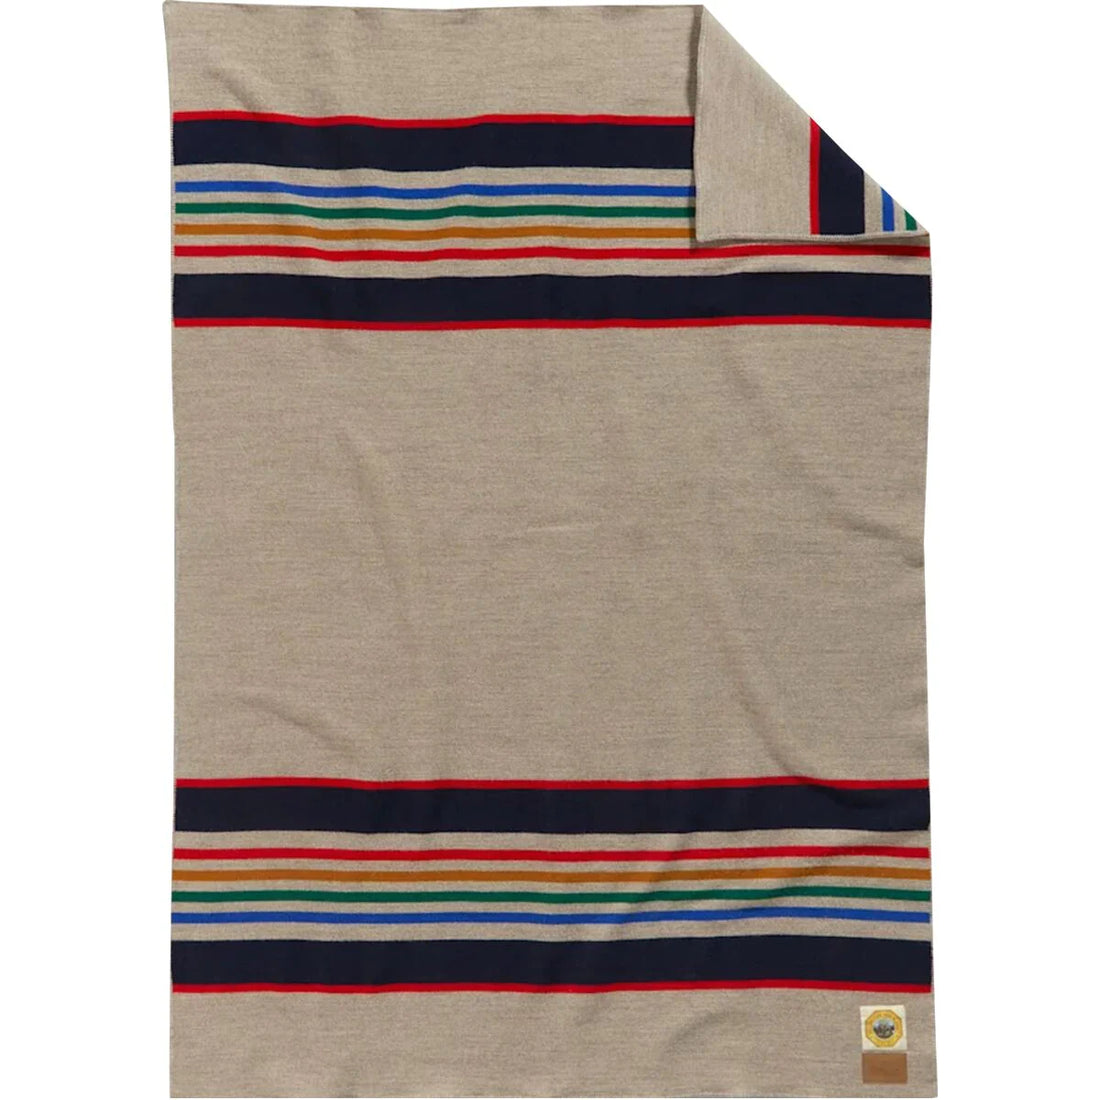 National Park Queen Blanket in Yellowstone in Taupe view of blanket